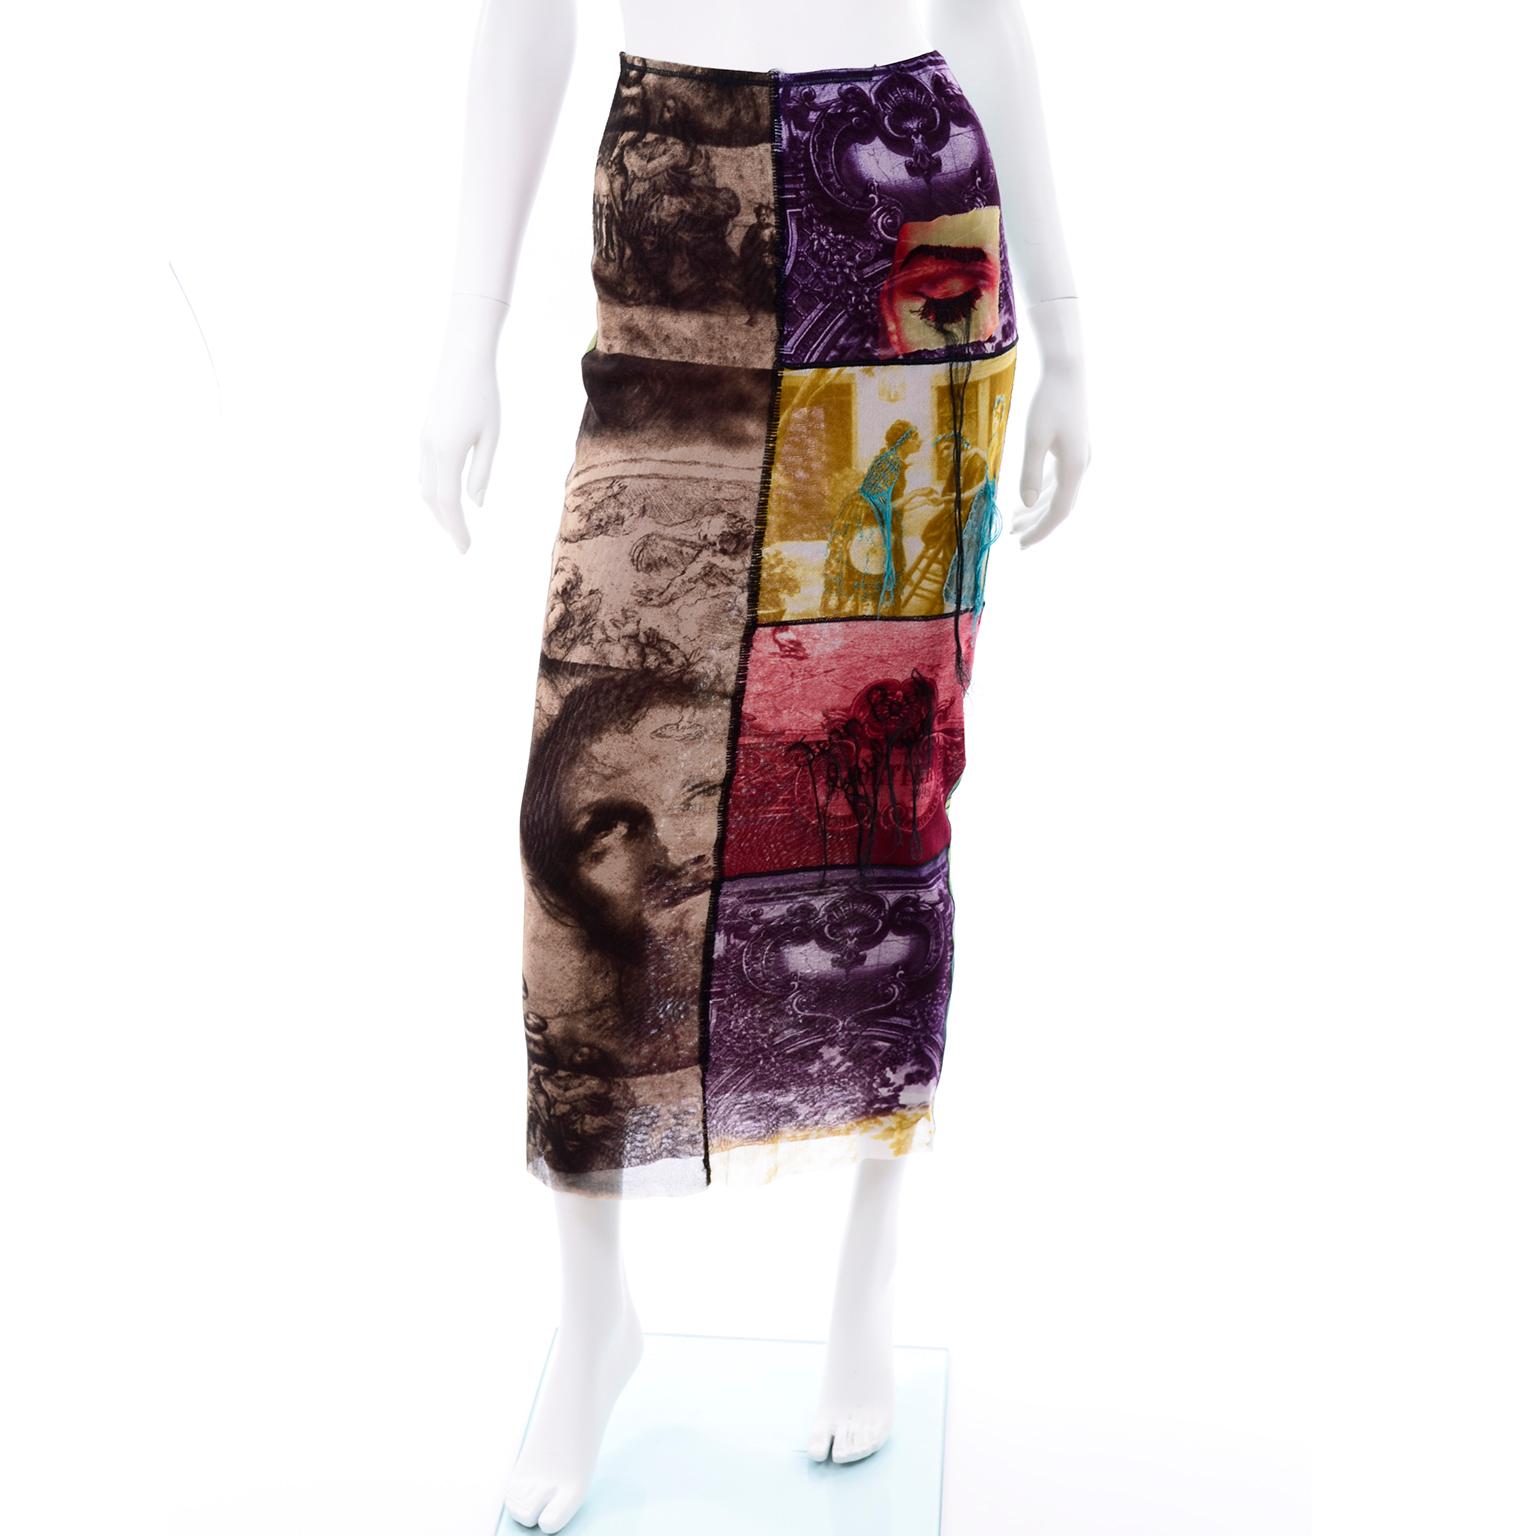 This Jean Paul Gaultier vintage skirt is from the 1990's and is made of a printed mesh fabric. The skirt has images from the bible as well as enlarged photo images from nature.  The skirt can even be worn as a strapless dress and is a great piece